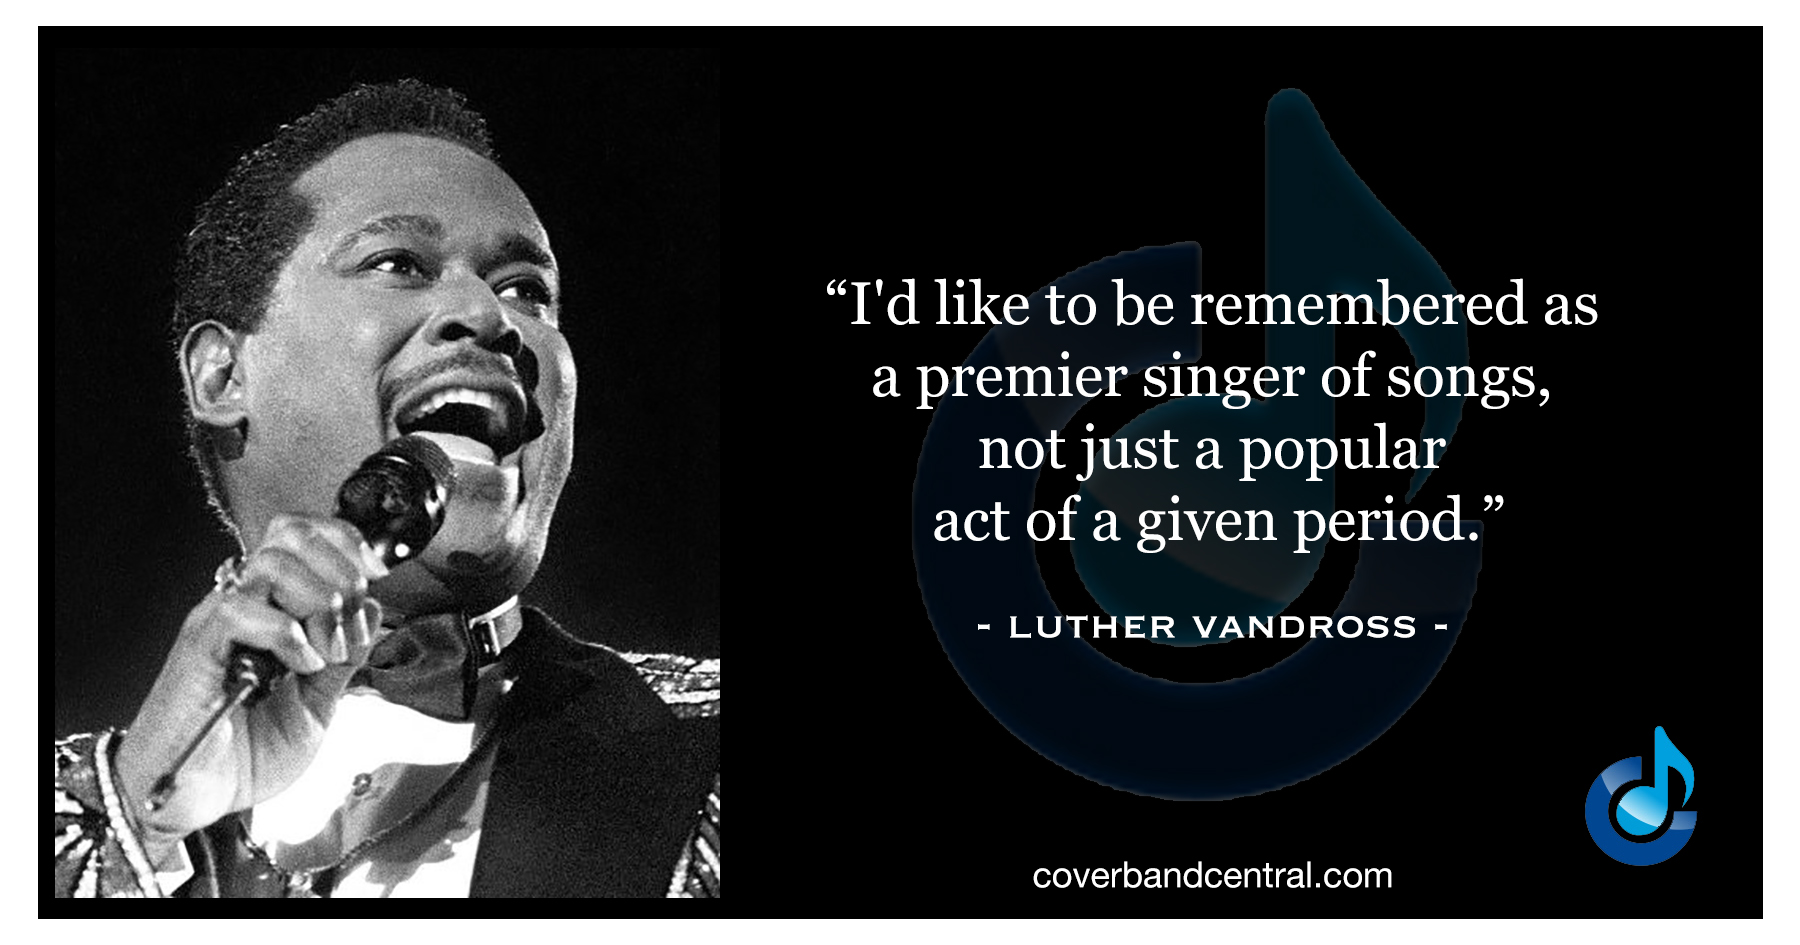 Luther Vandross quote